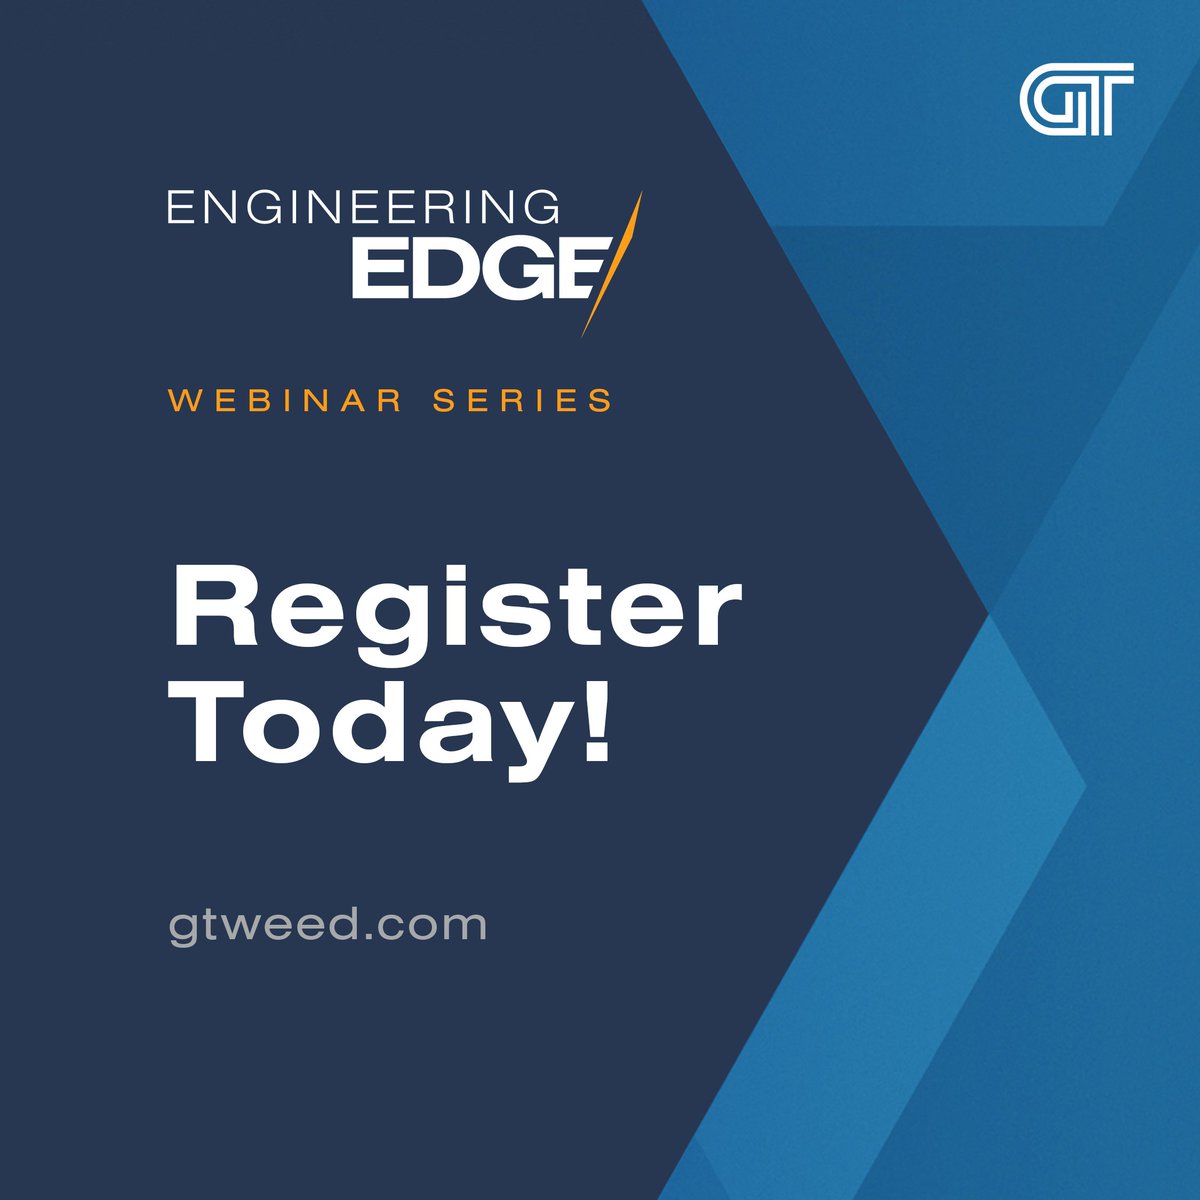 Supply chain worries? Get an inside look at Greene Tweed's proven strategies to enhance business resilience and secure uninterrupted operations - click the link to register for the webinar today. #SupplyChain #Manufacturing gtweed.me/3PWB7nZ